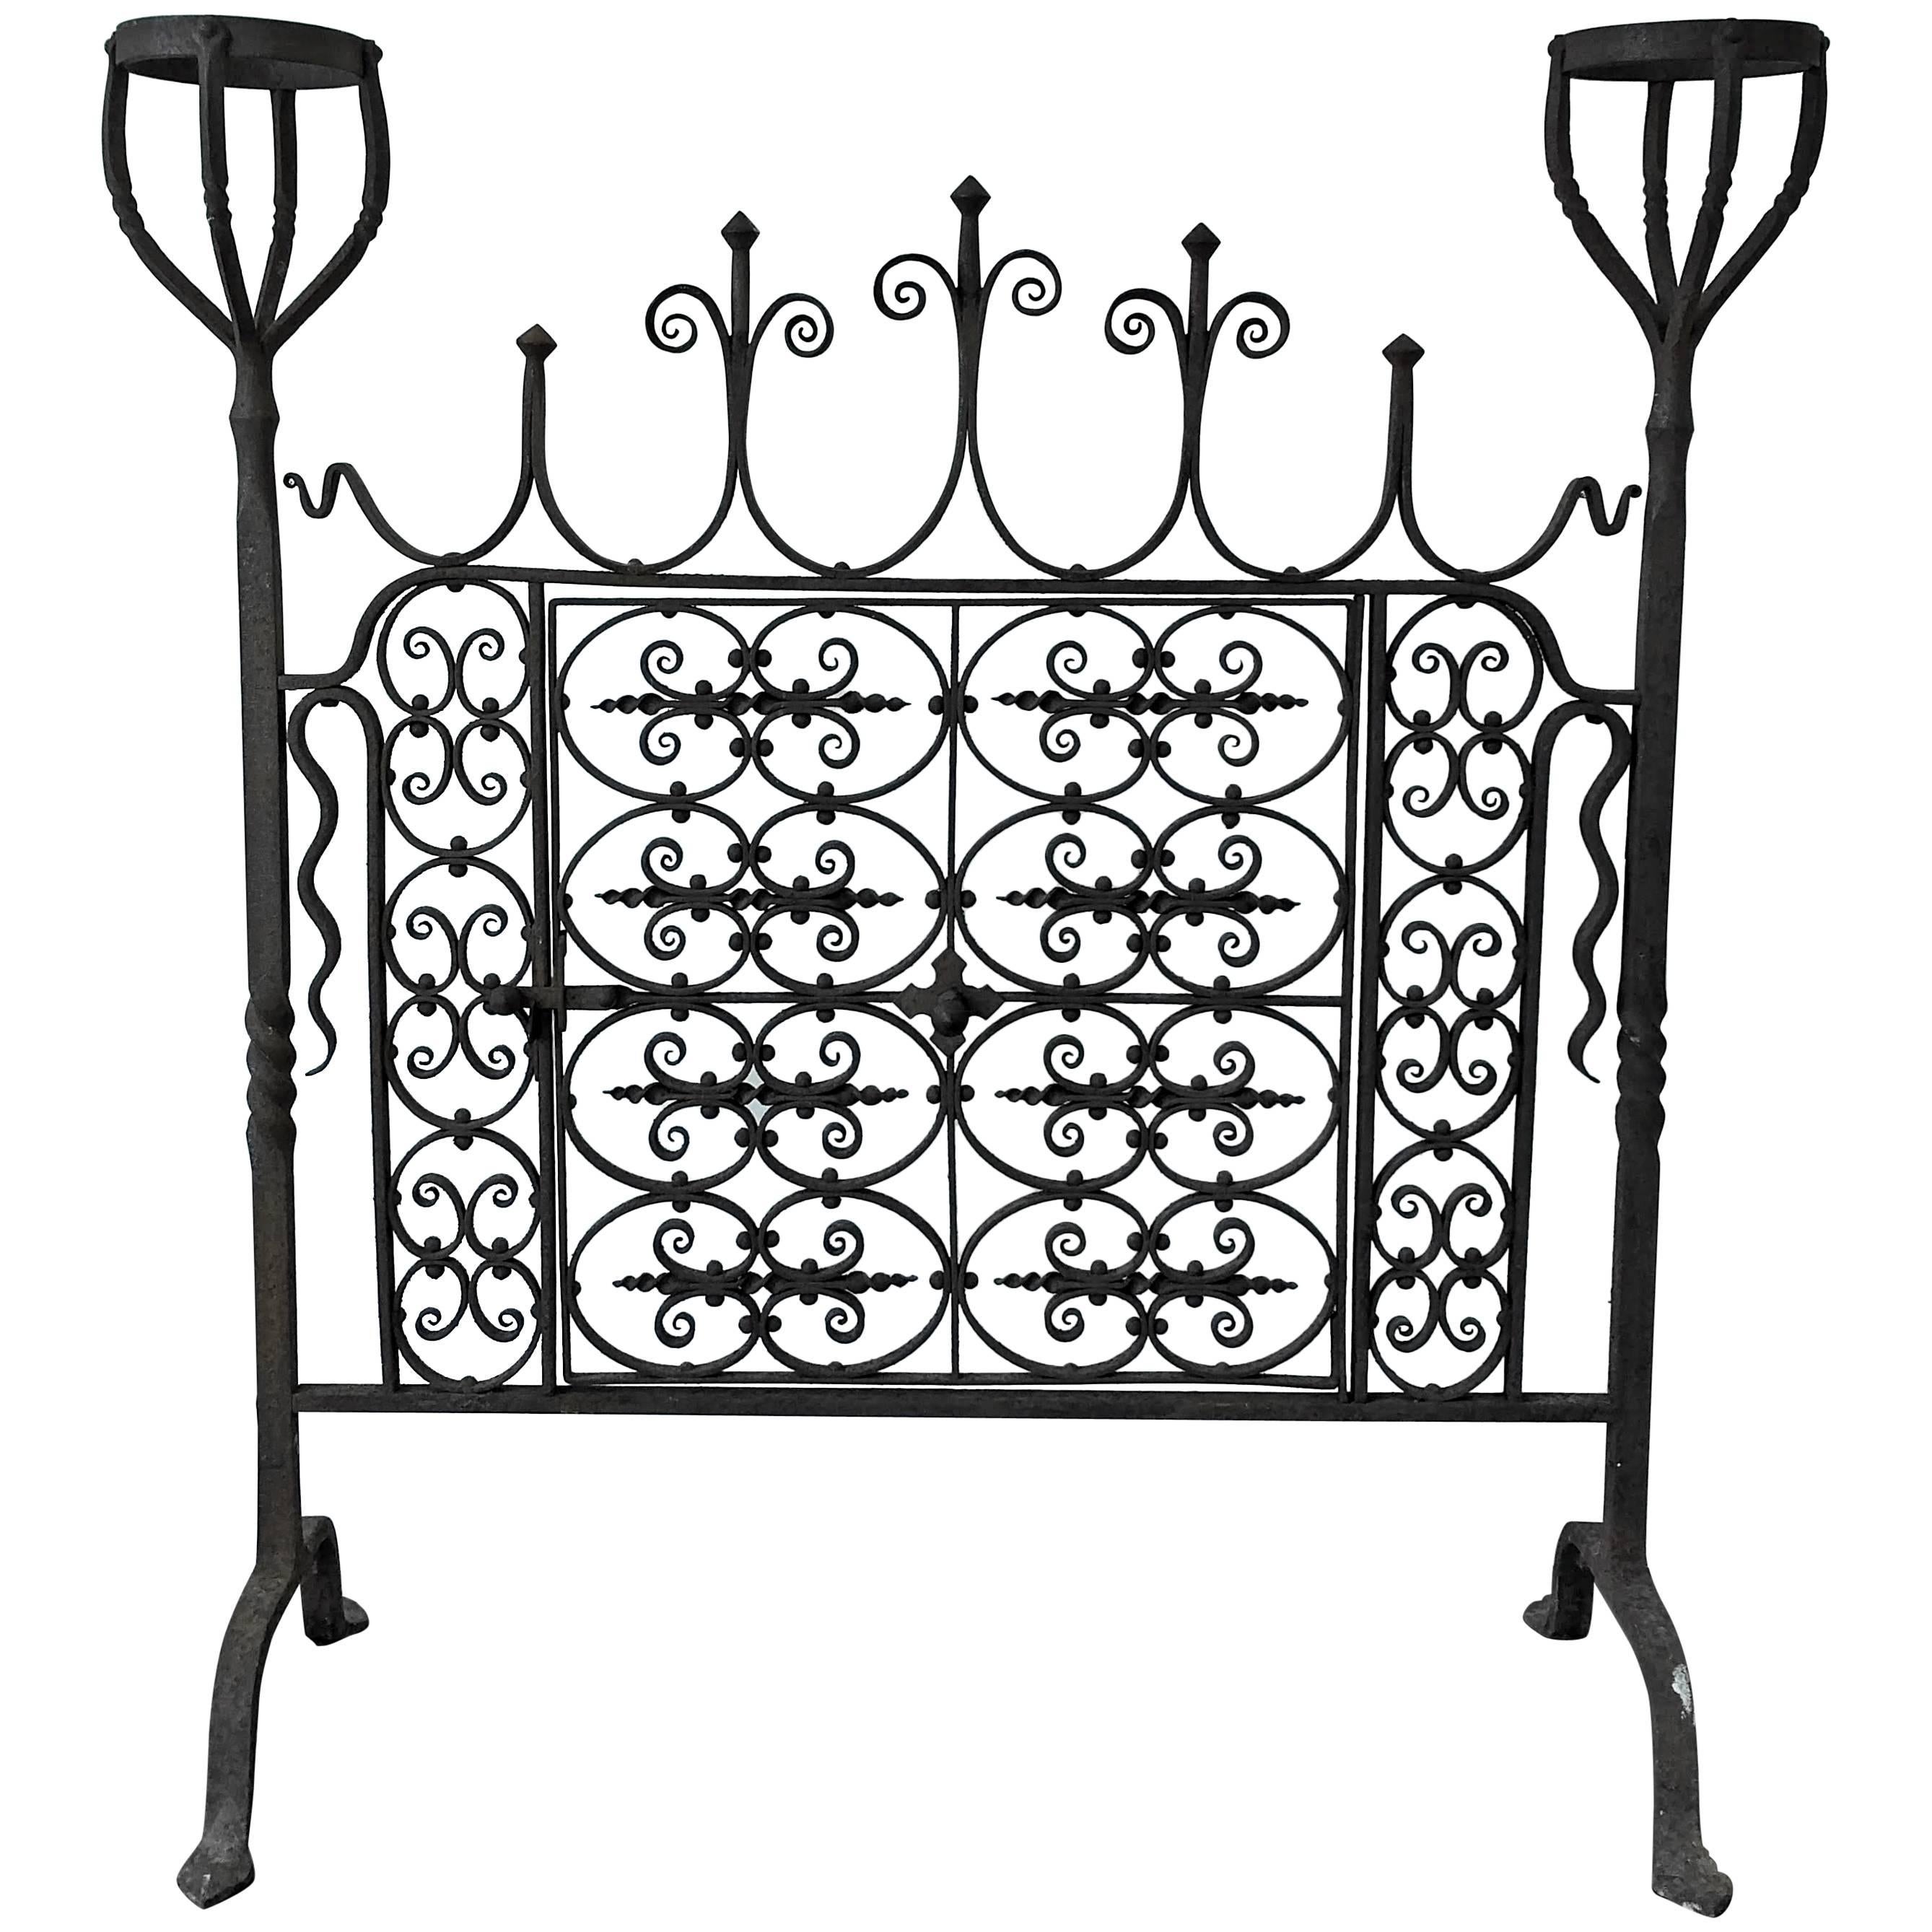 18th Century Wrought Iron Hand-Forged Fire Screen For Sale